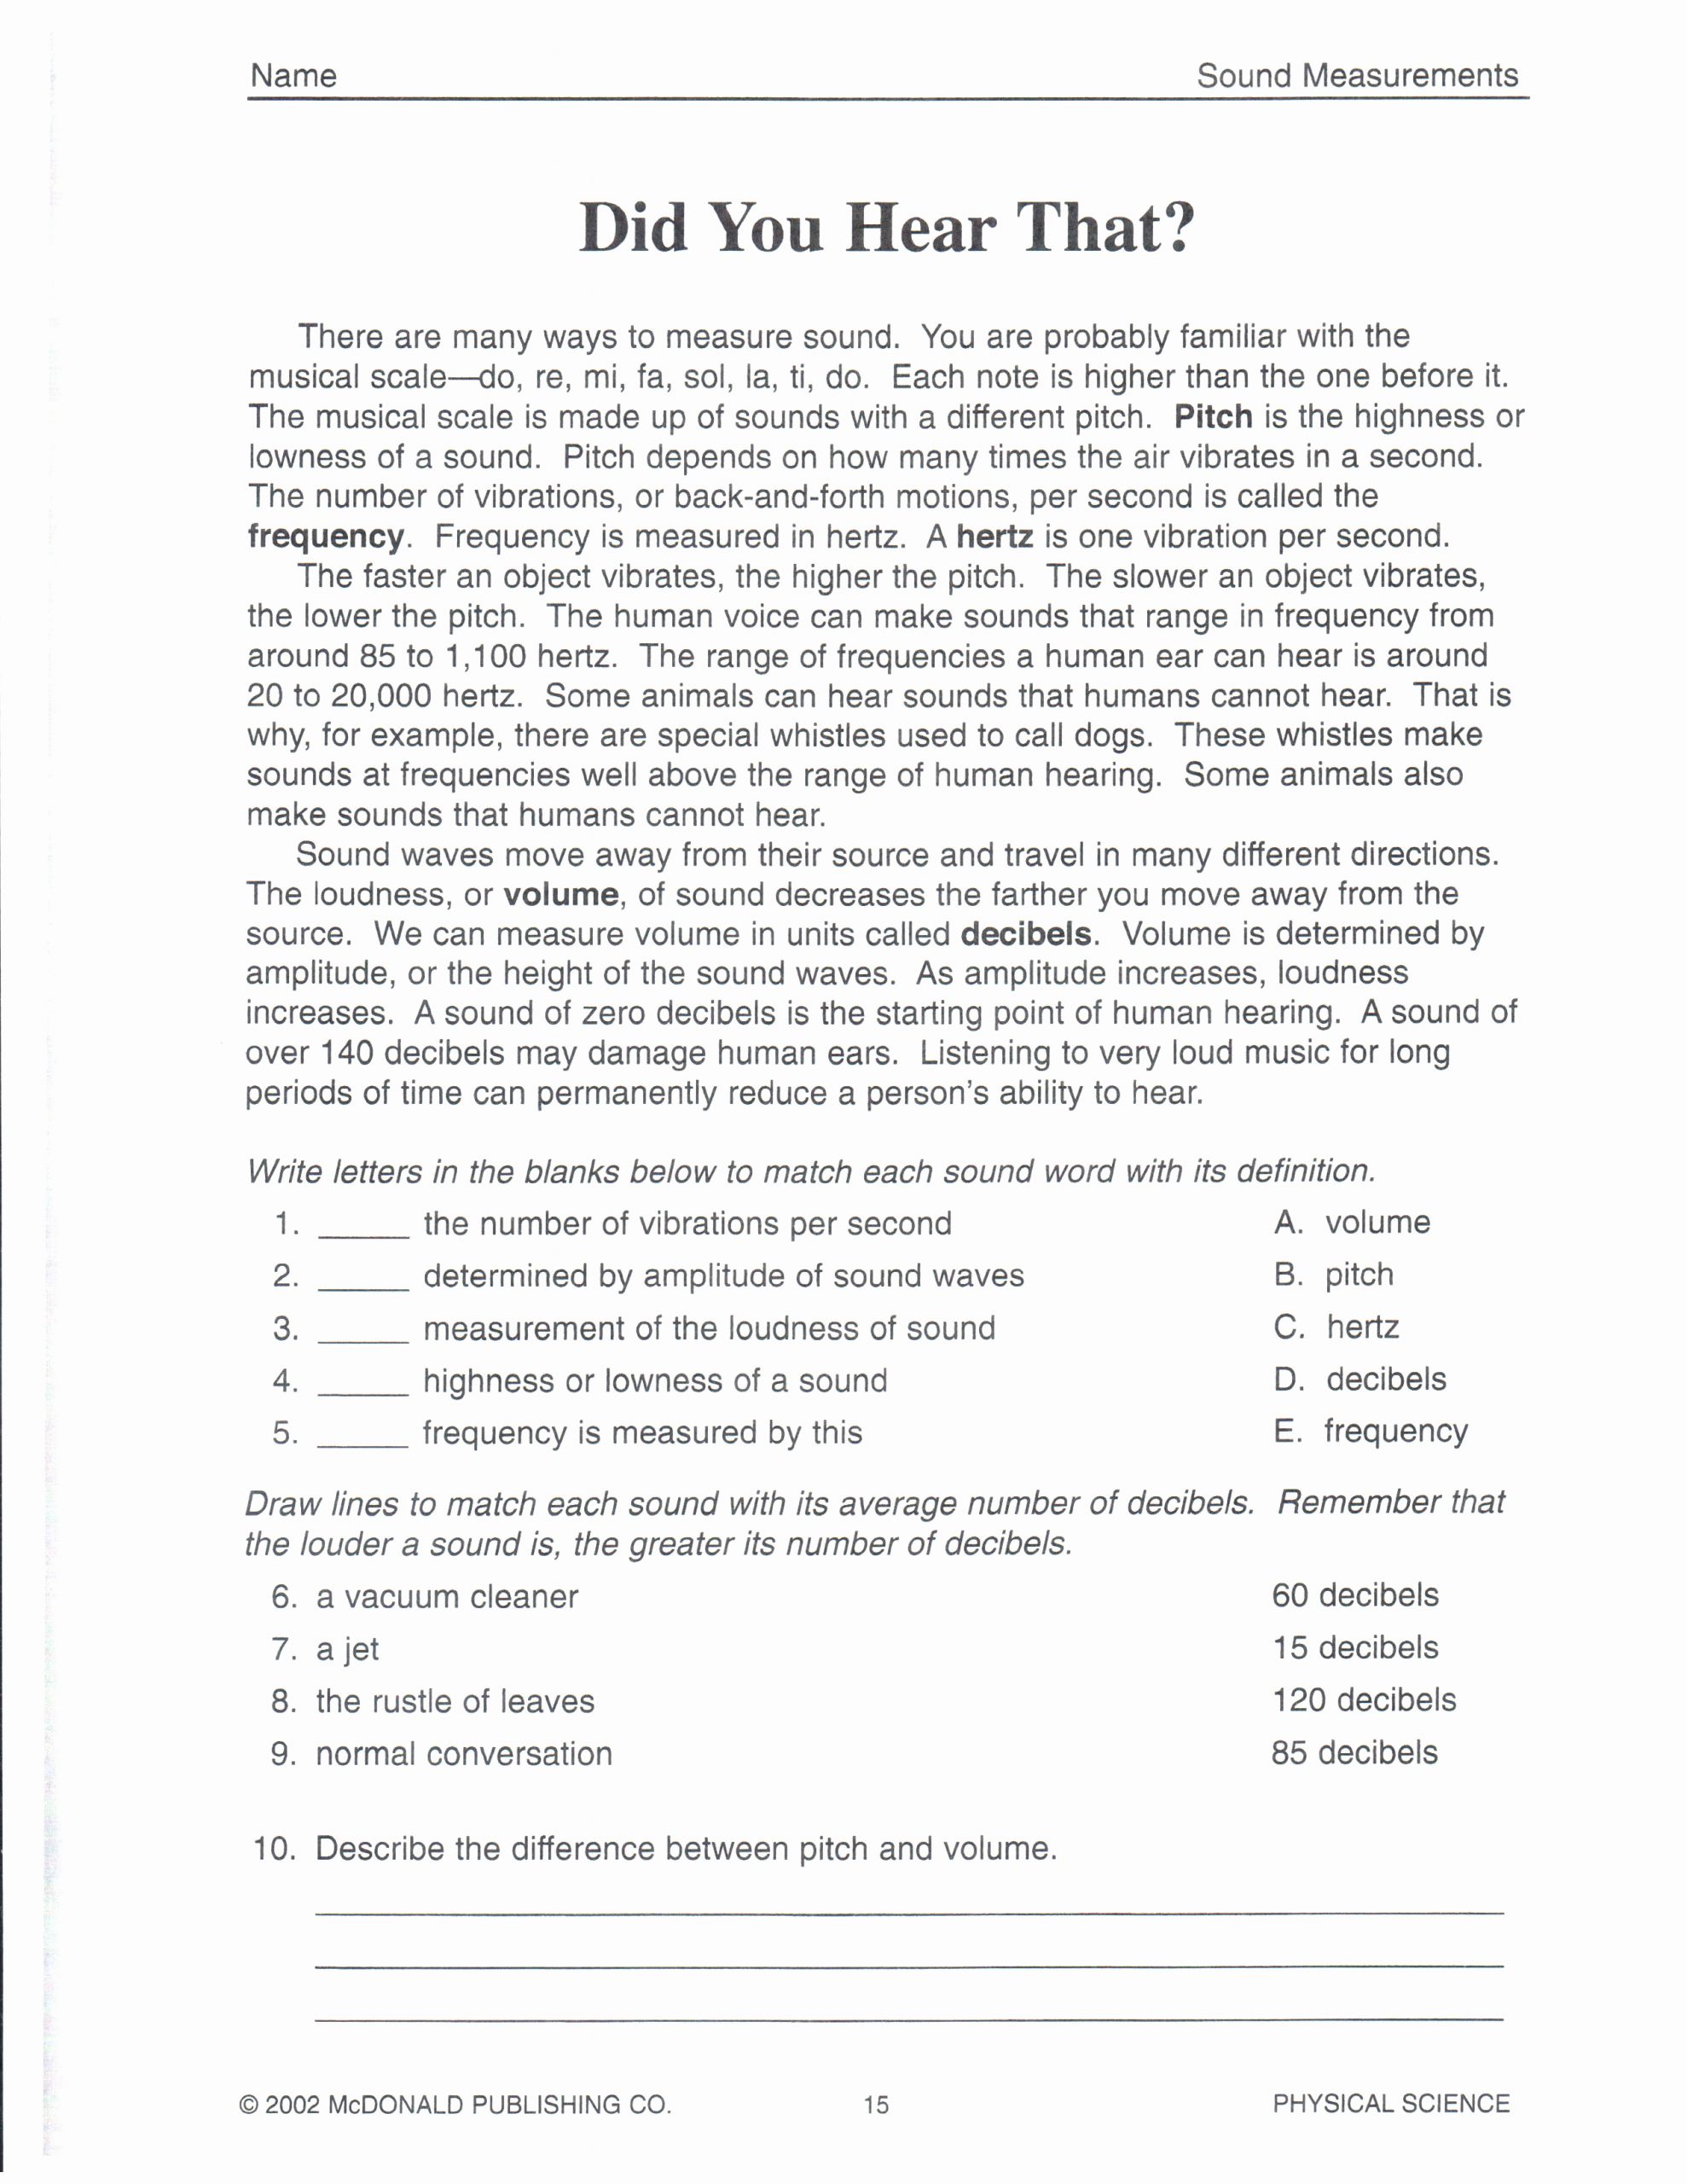 Free 8th Grade Science Worksheets Beautiful Physical Science March 2013